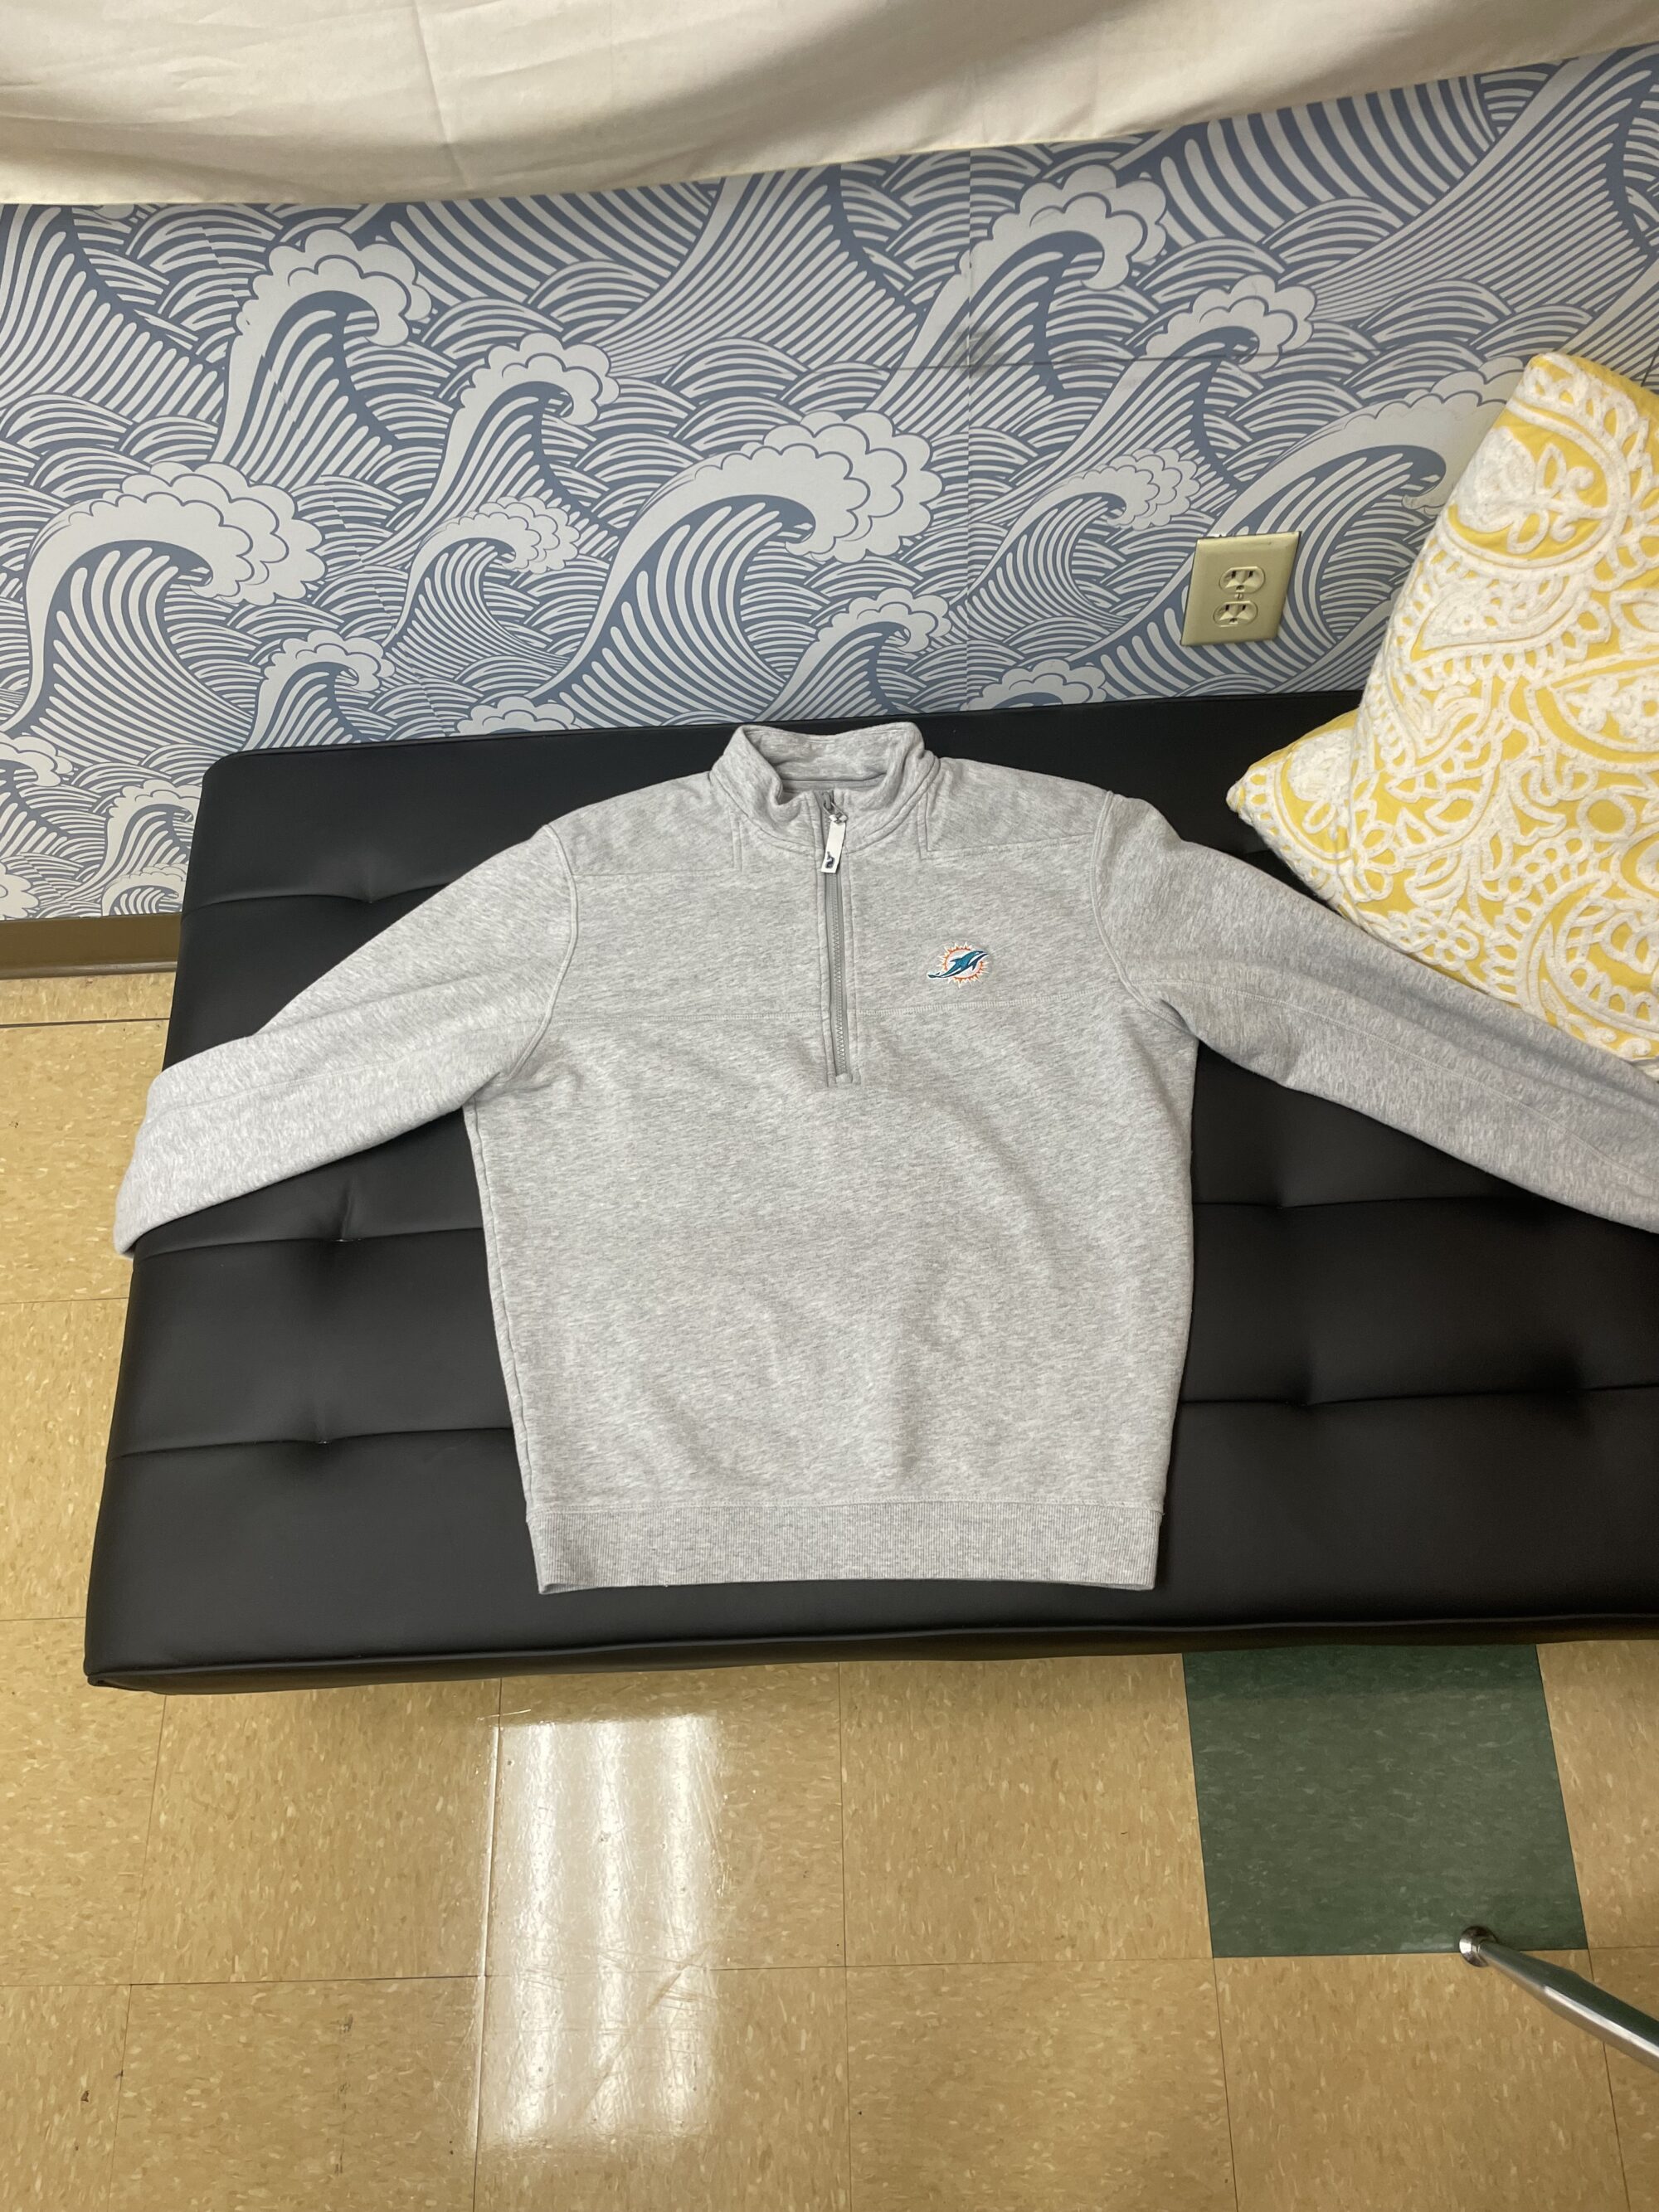 Photo of a gray sweater with a small Miami Dolphins logo on the chest.